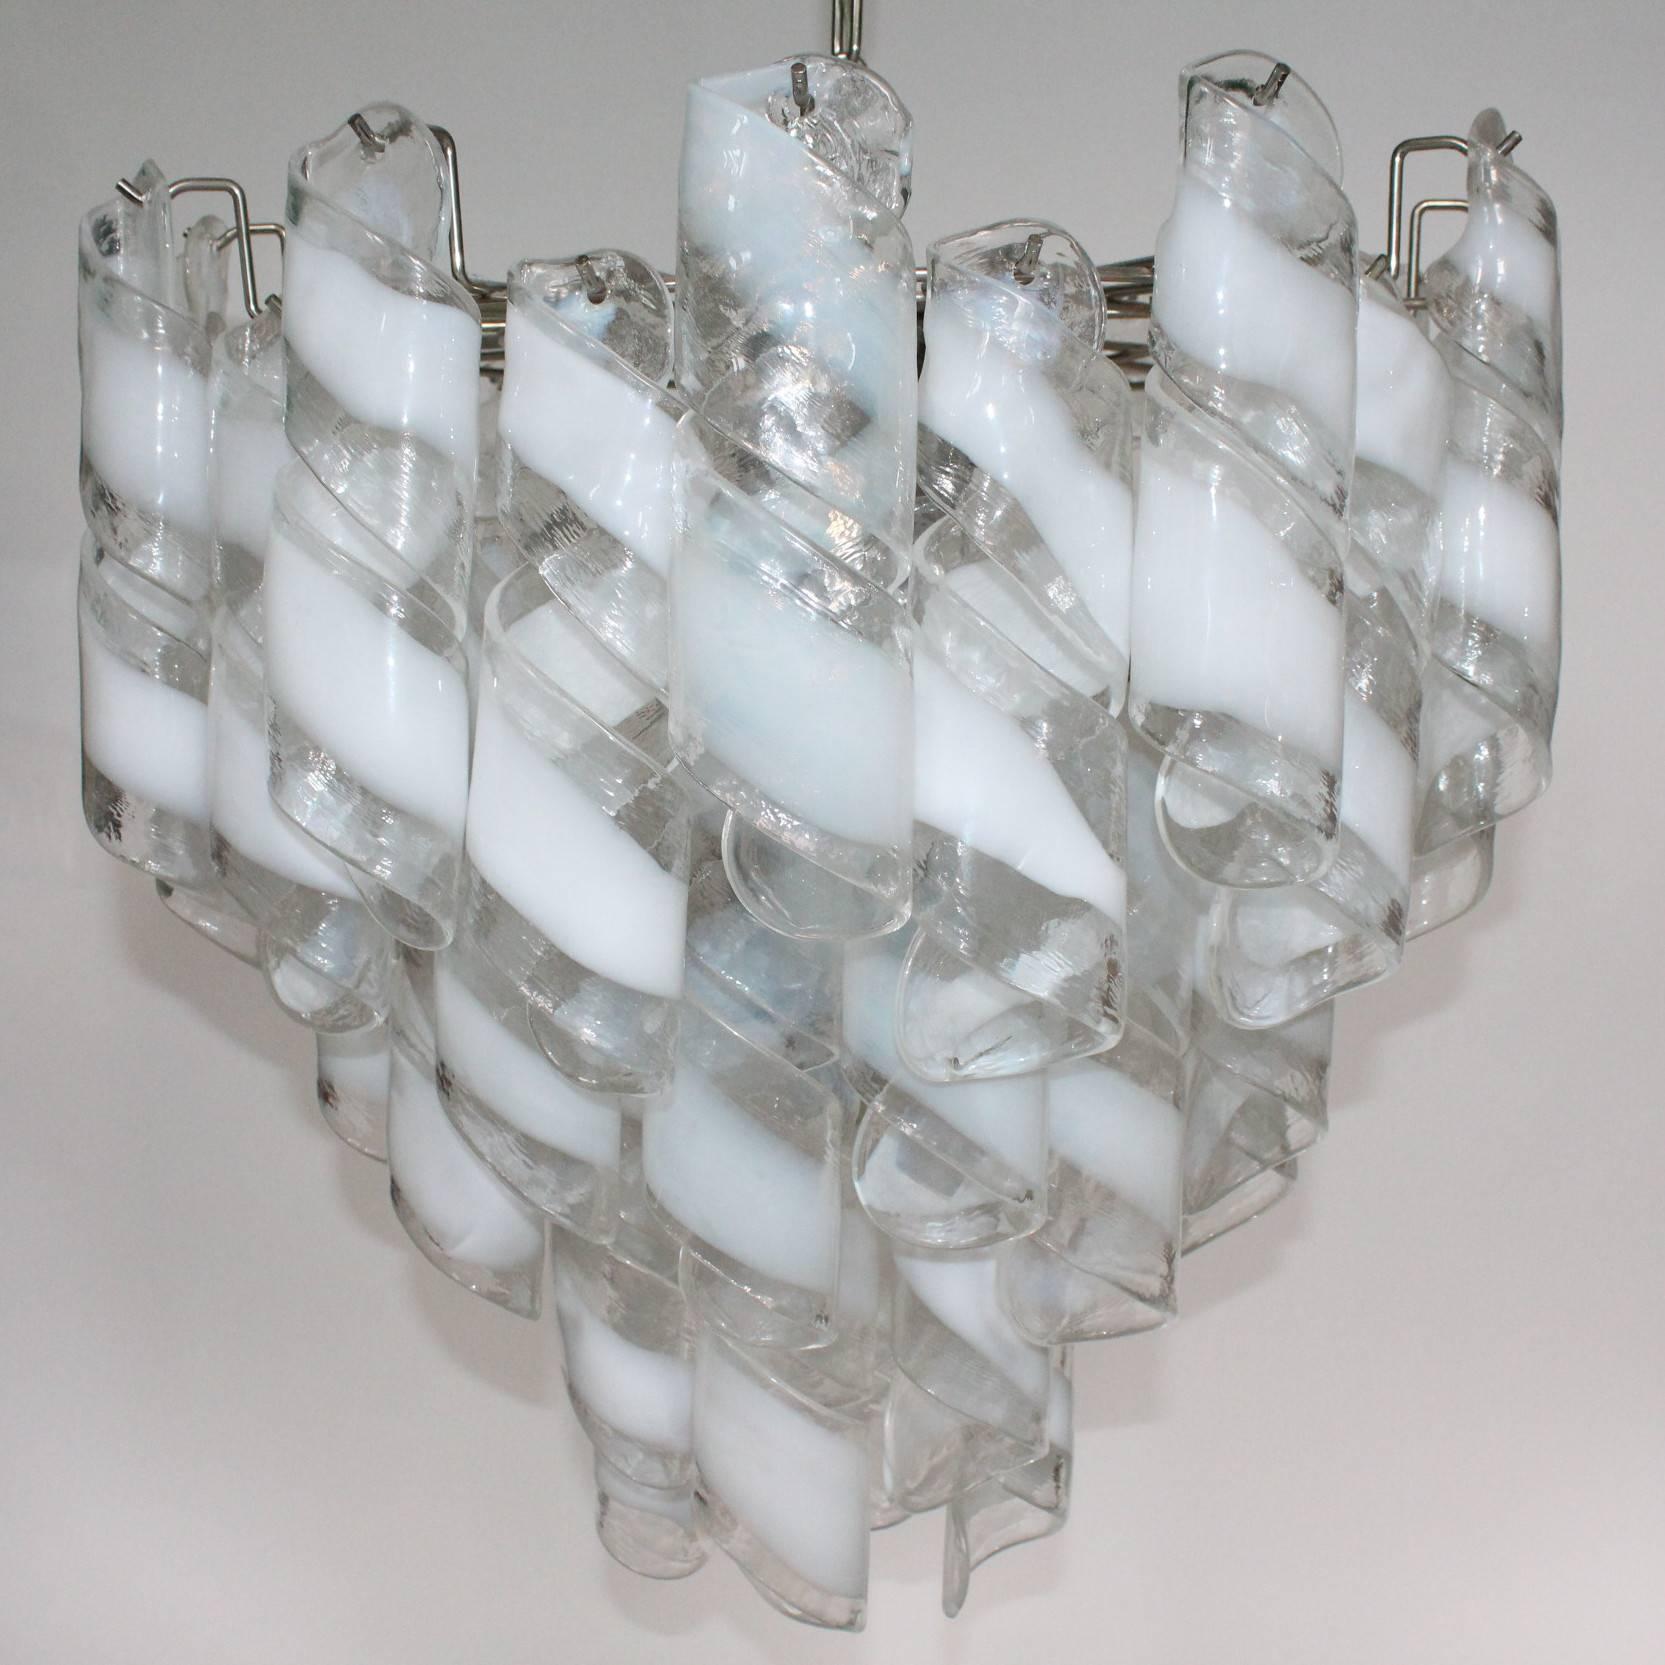 A Murano glass chandelier by Mazzega. Includes tiers of clear and white Murano Glass spiralled ribbons. In good condition.